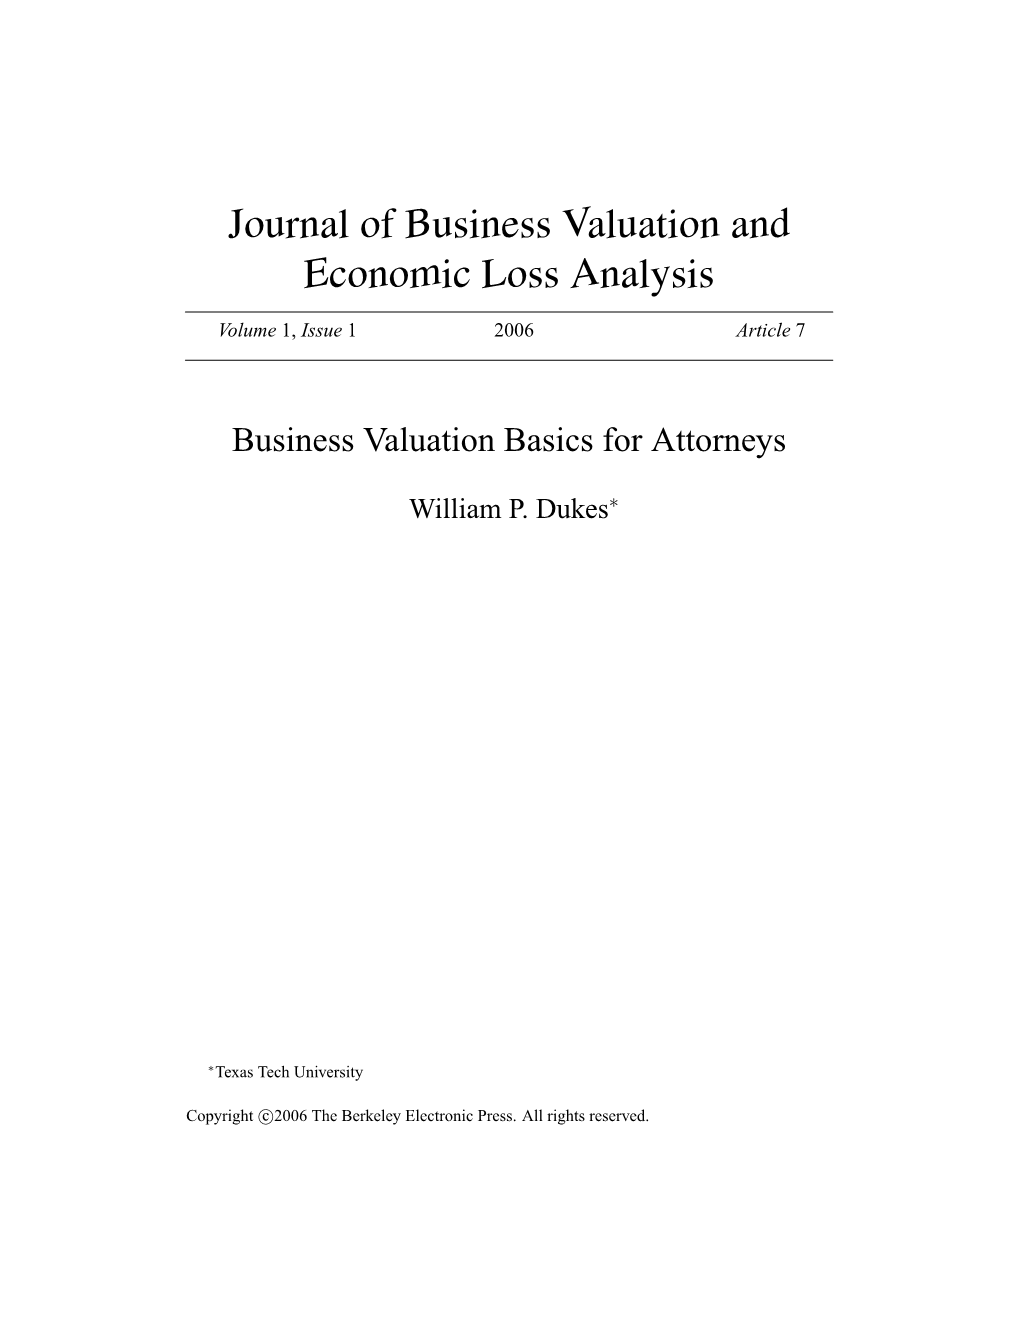 Business Valuation Basics for Attorneys